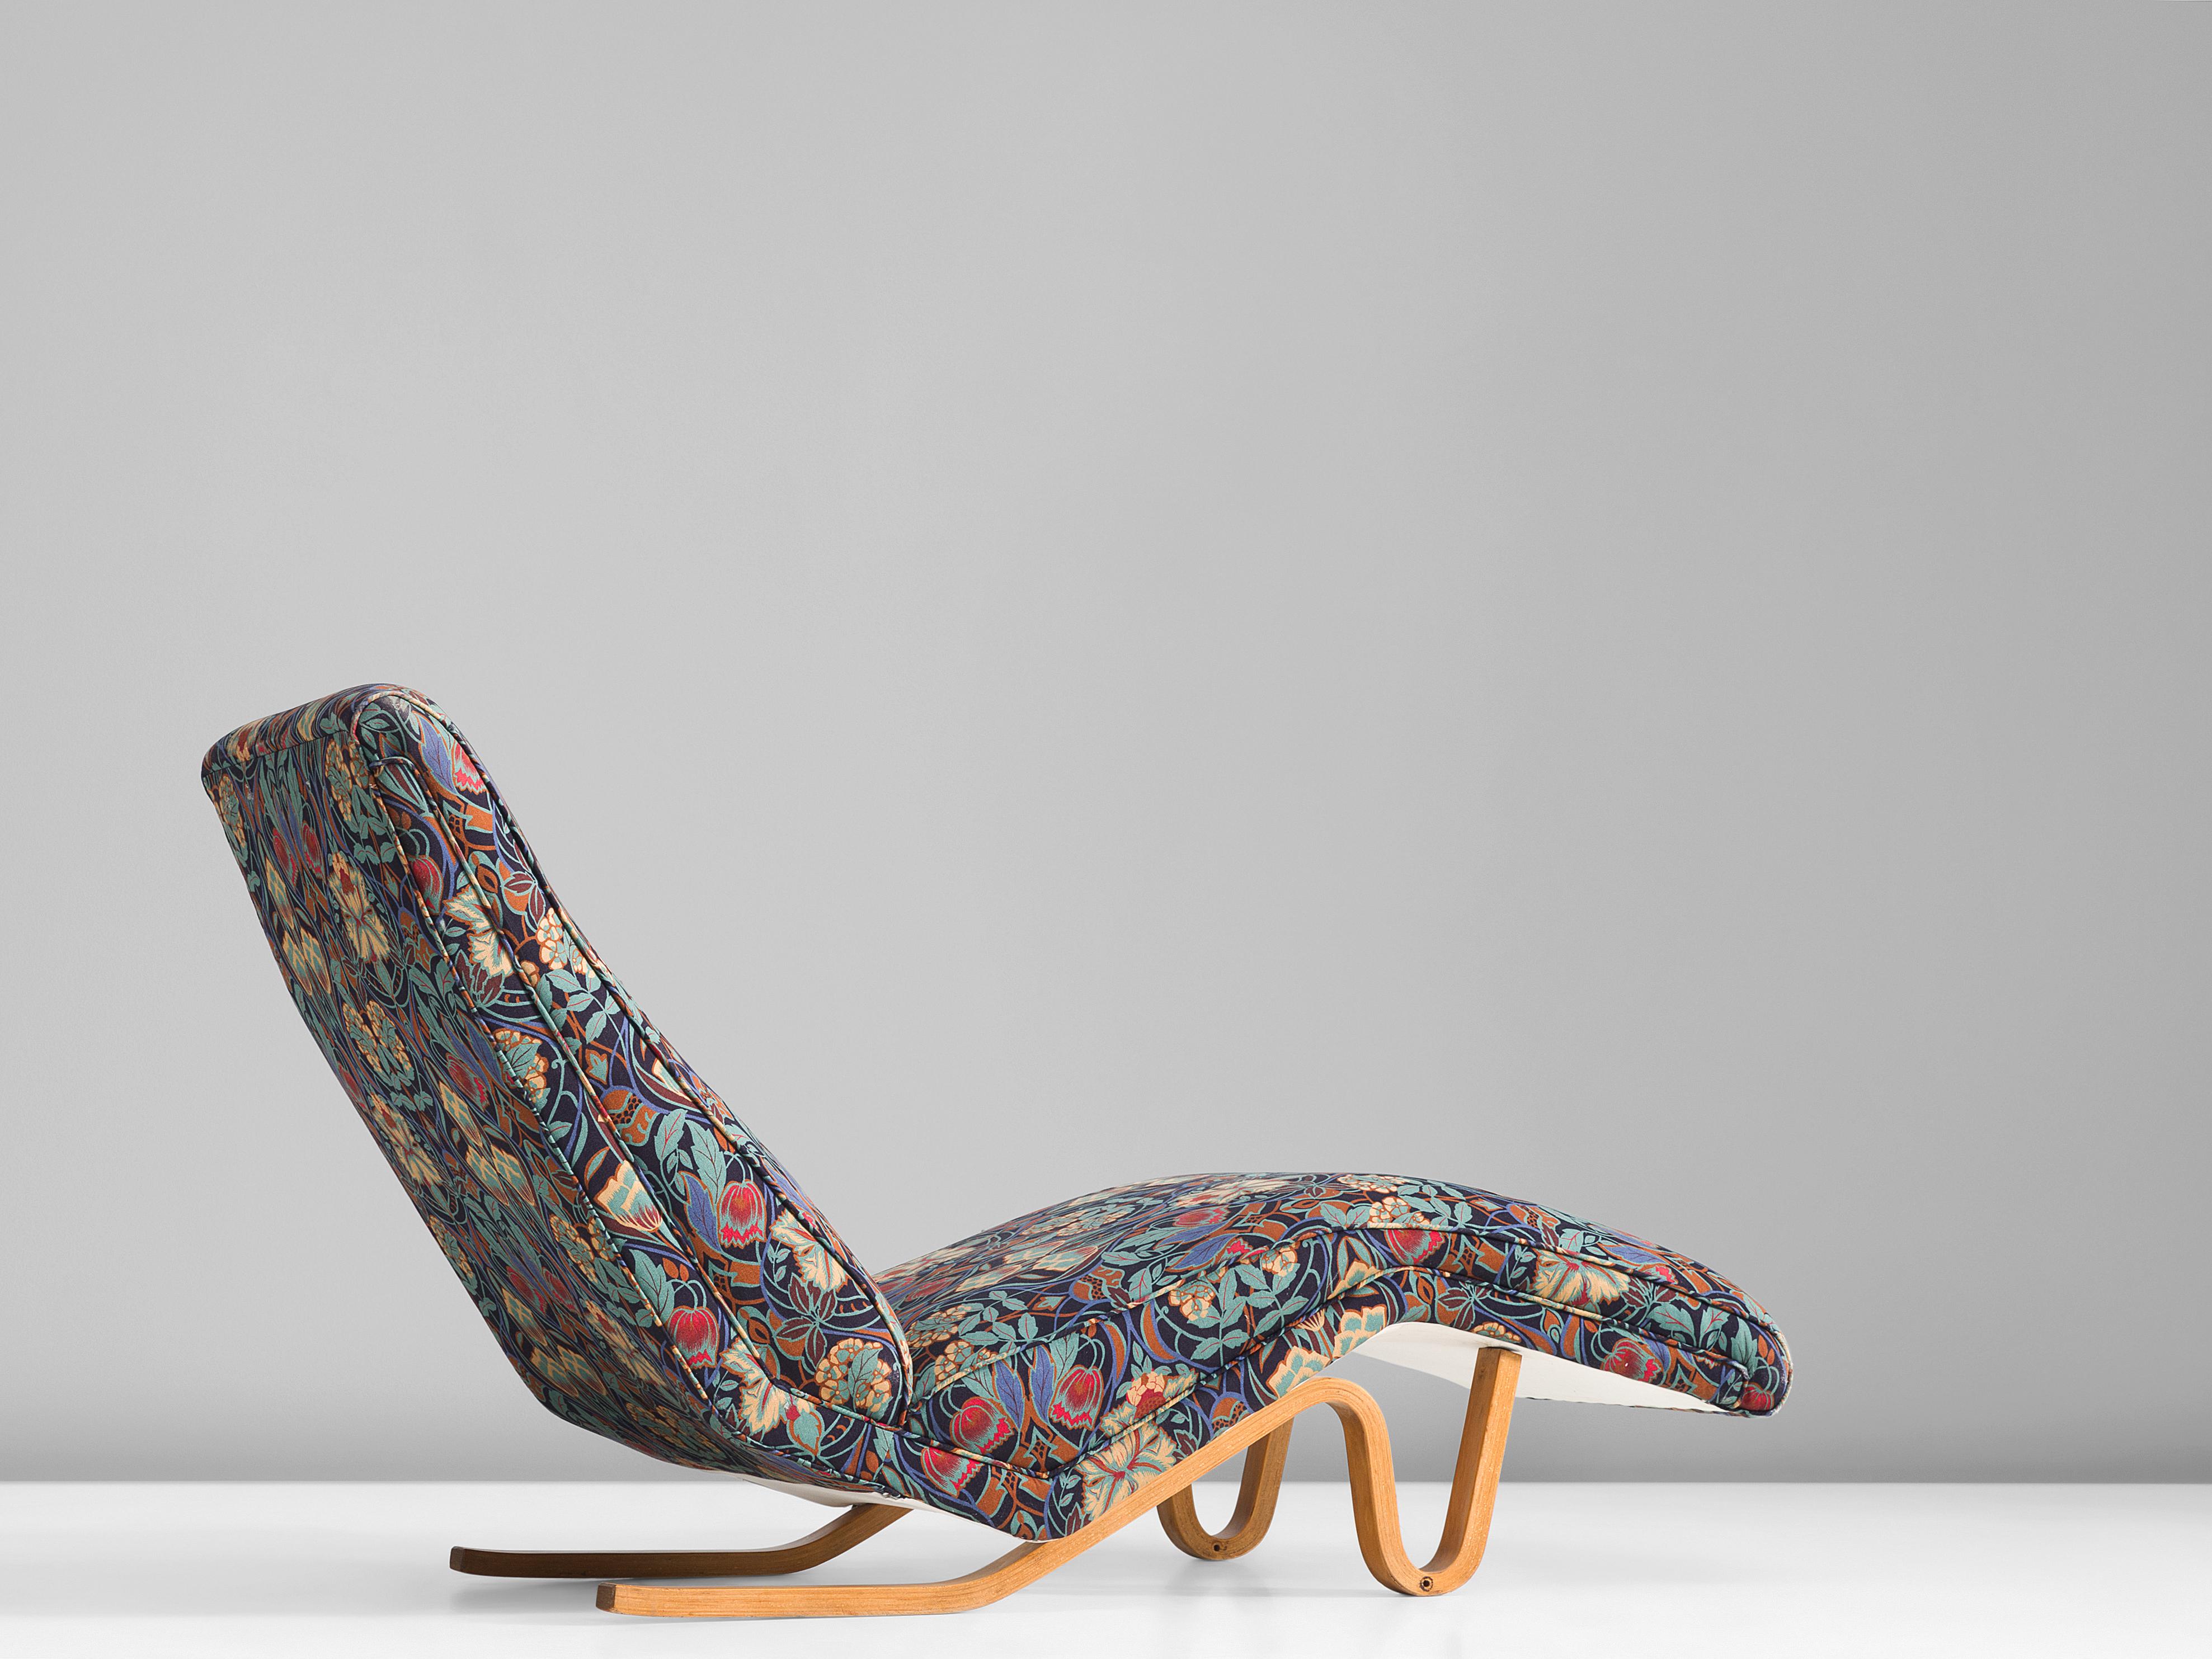 Andrew J. Milne, chaise lounge, beech, fabric, United Kingdom, 1950s

This chaise lounge is designed by the English designer Andrew J. Milne. The bent beech legs form two waved figures, which give this daybed its distinctive silhouette. The daybed